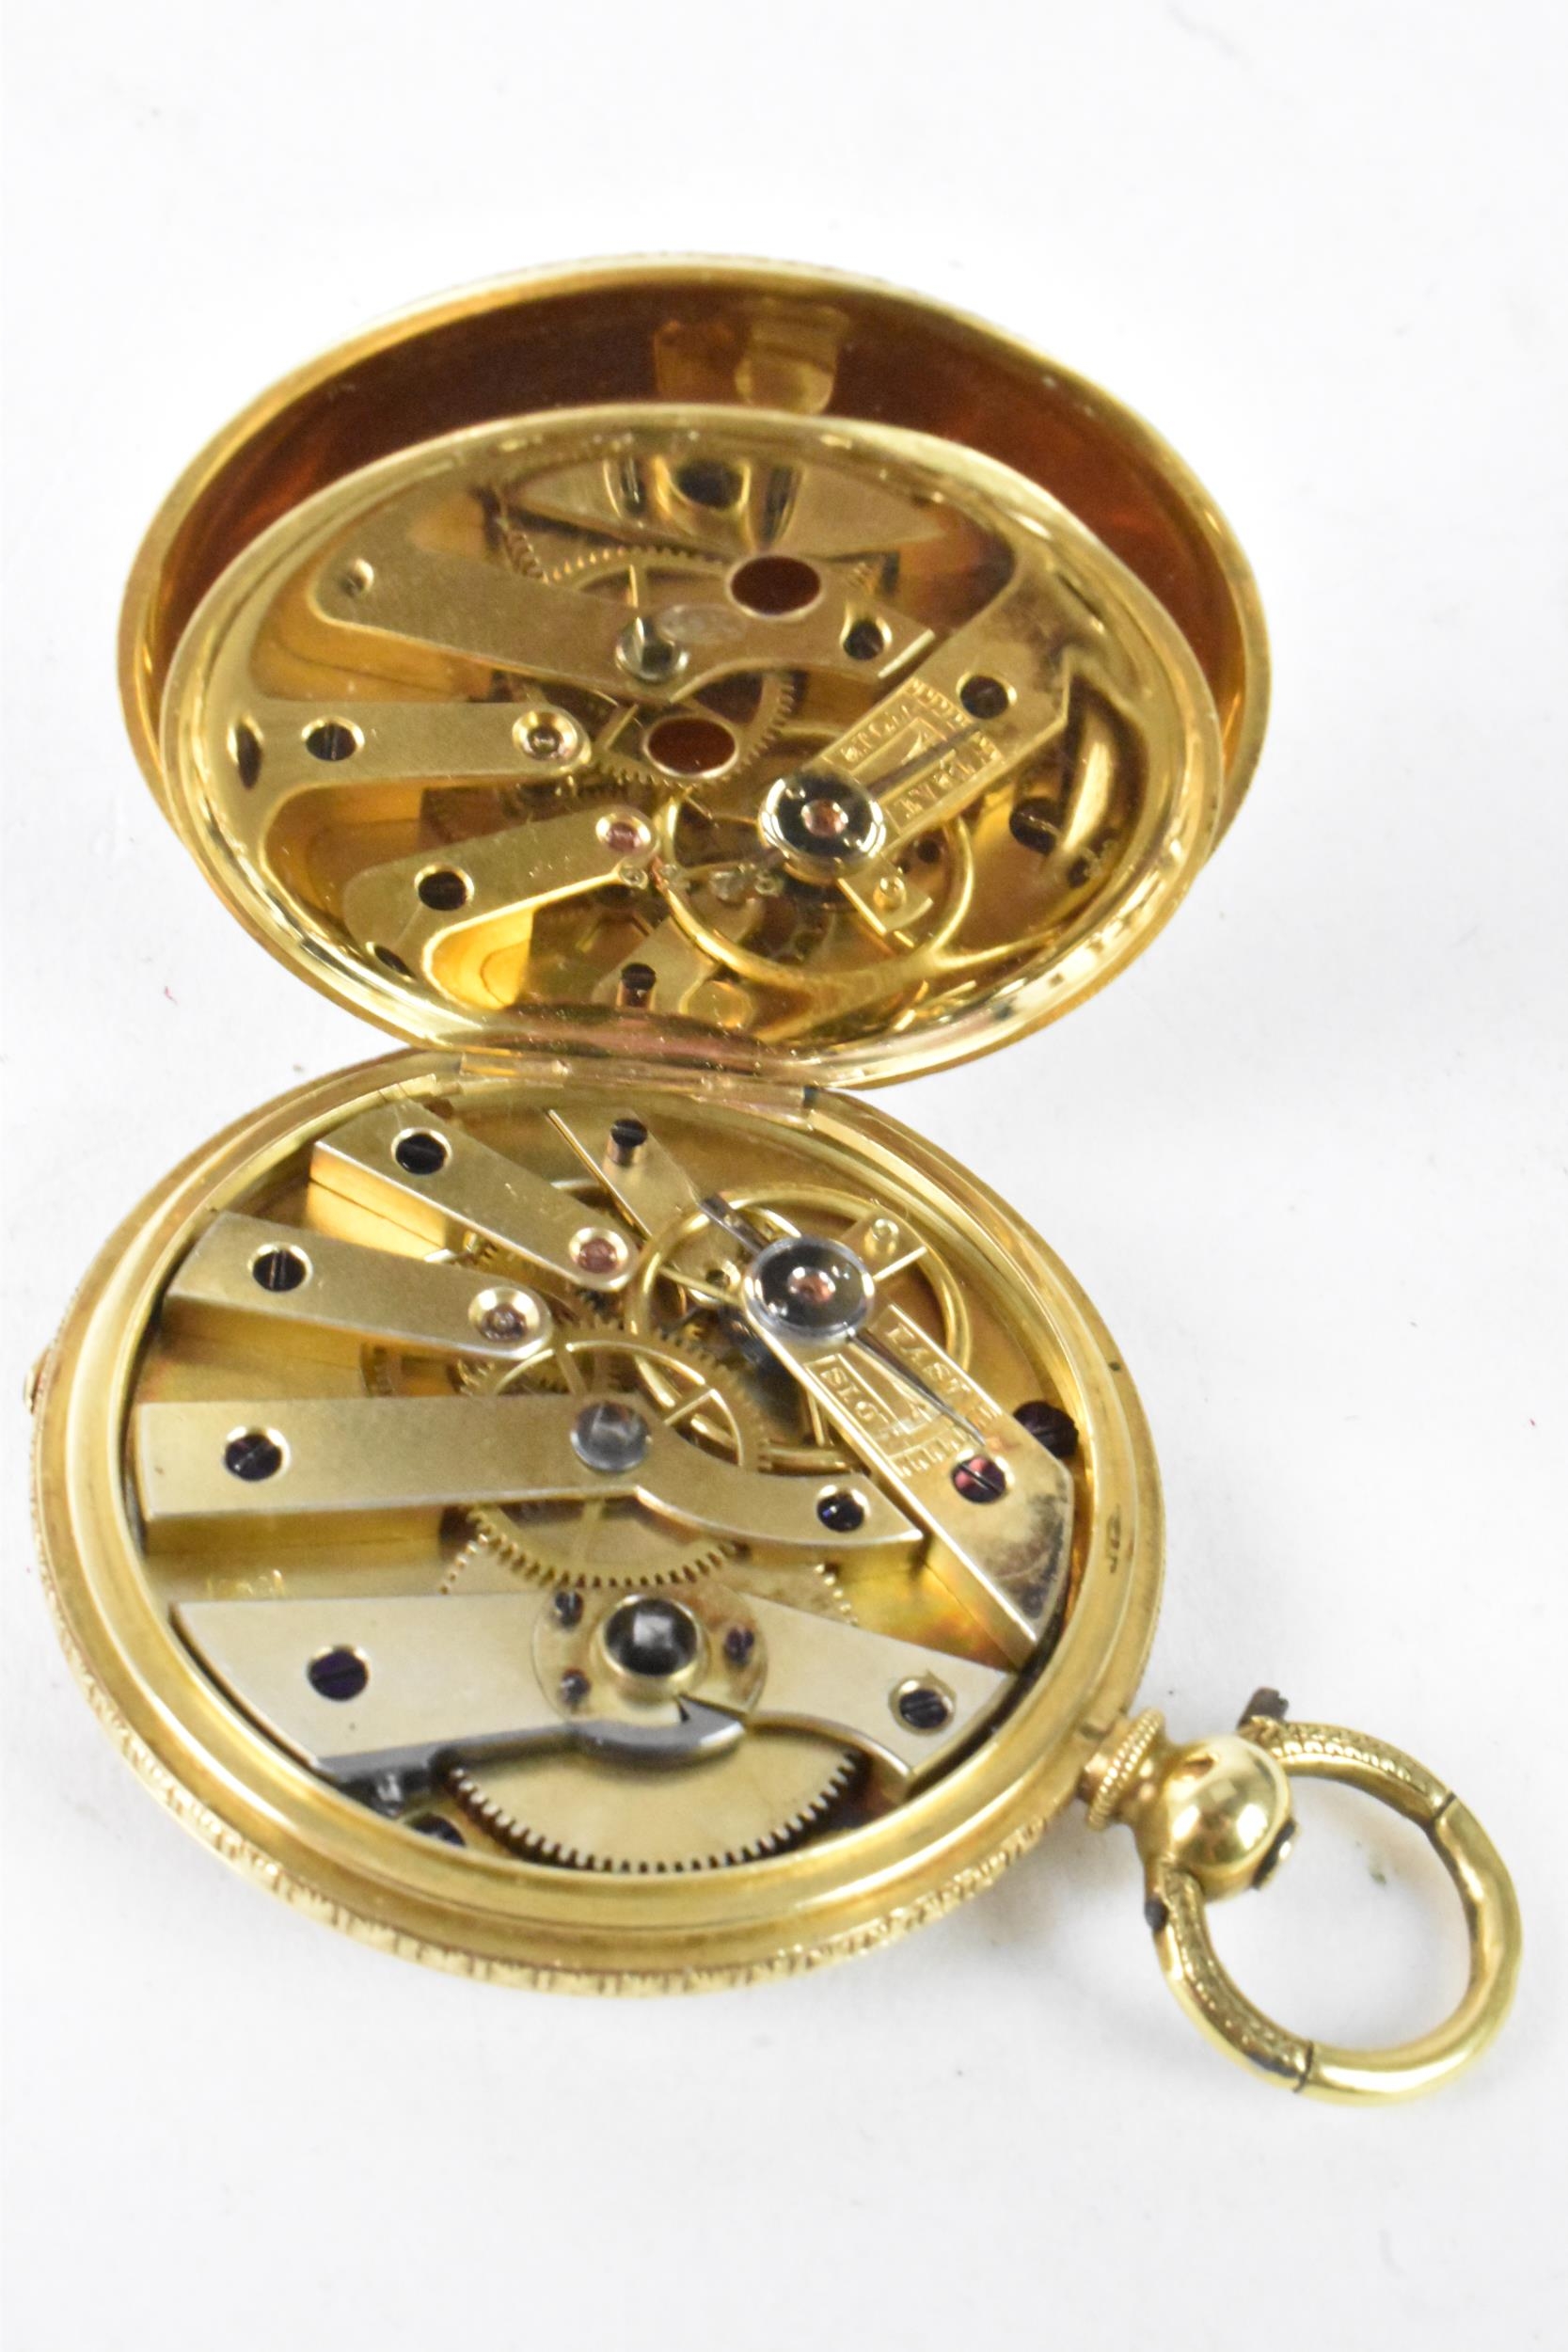 A late 19th/early 20th century 18ct gold half hunter ladies fob watch, the case having an ornate - Image 4 of 4